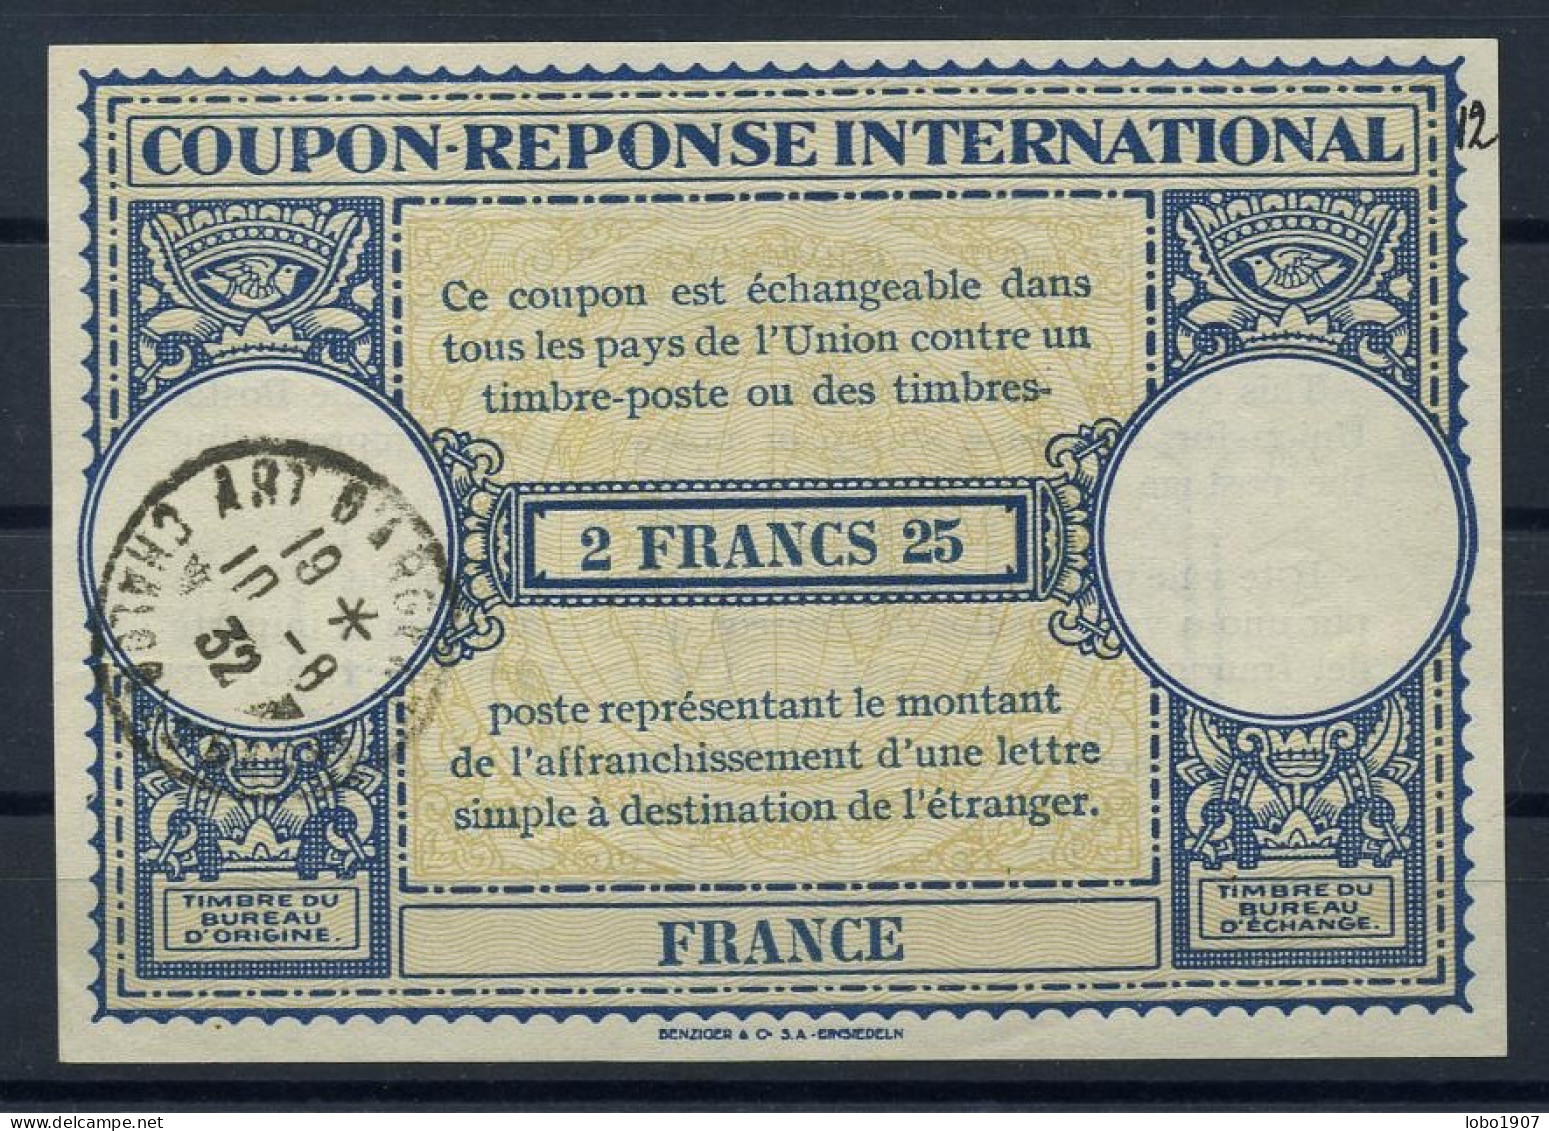 FRANCE  Lo9  2 FRANCS 25  International Reply Coupon Reponse Antwortschein IRC IAS Cupon Respuesta O CHALON 10.08.32 - Reply Coupons